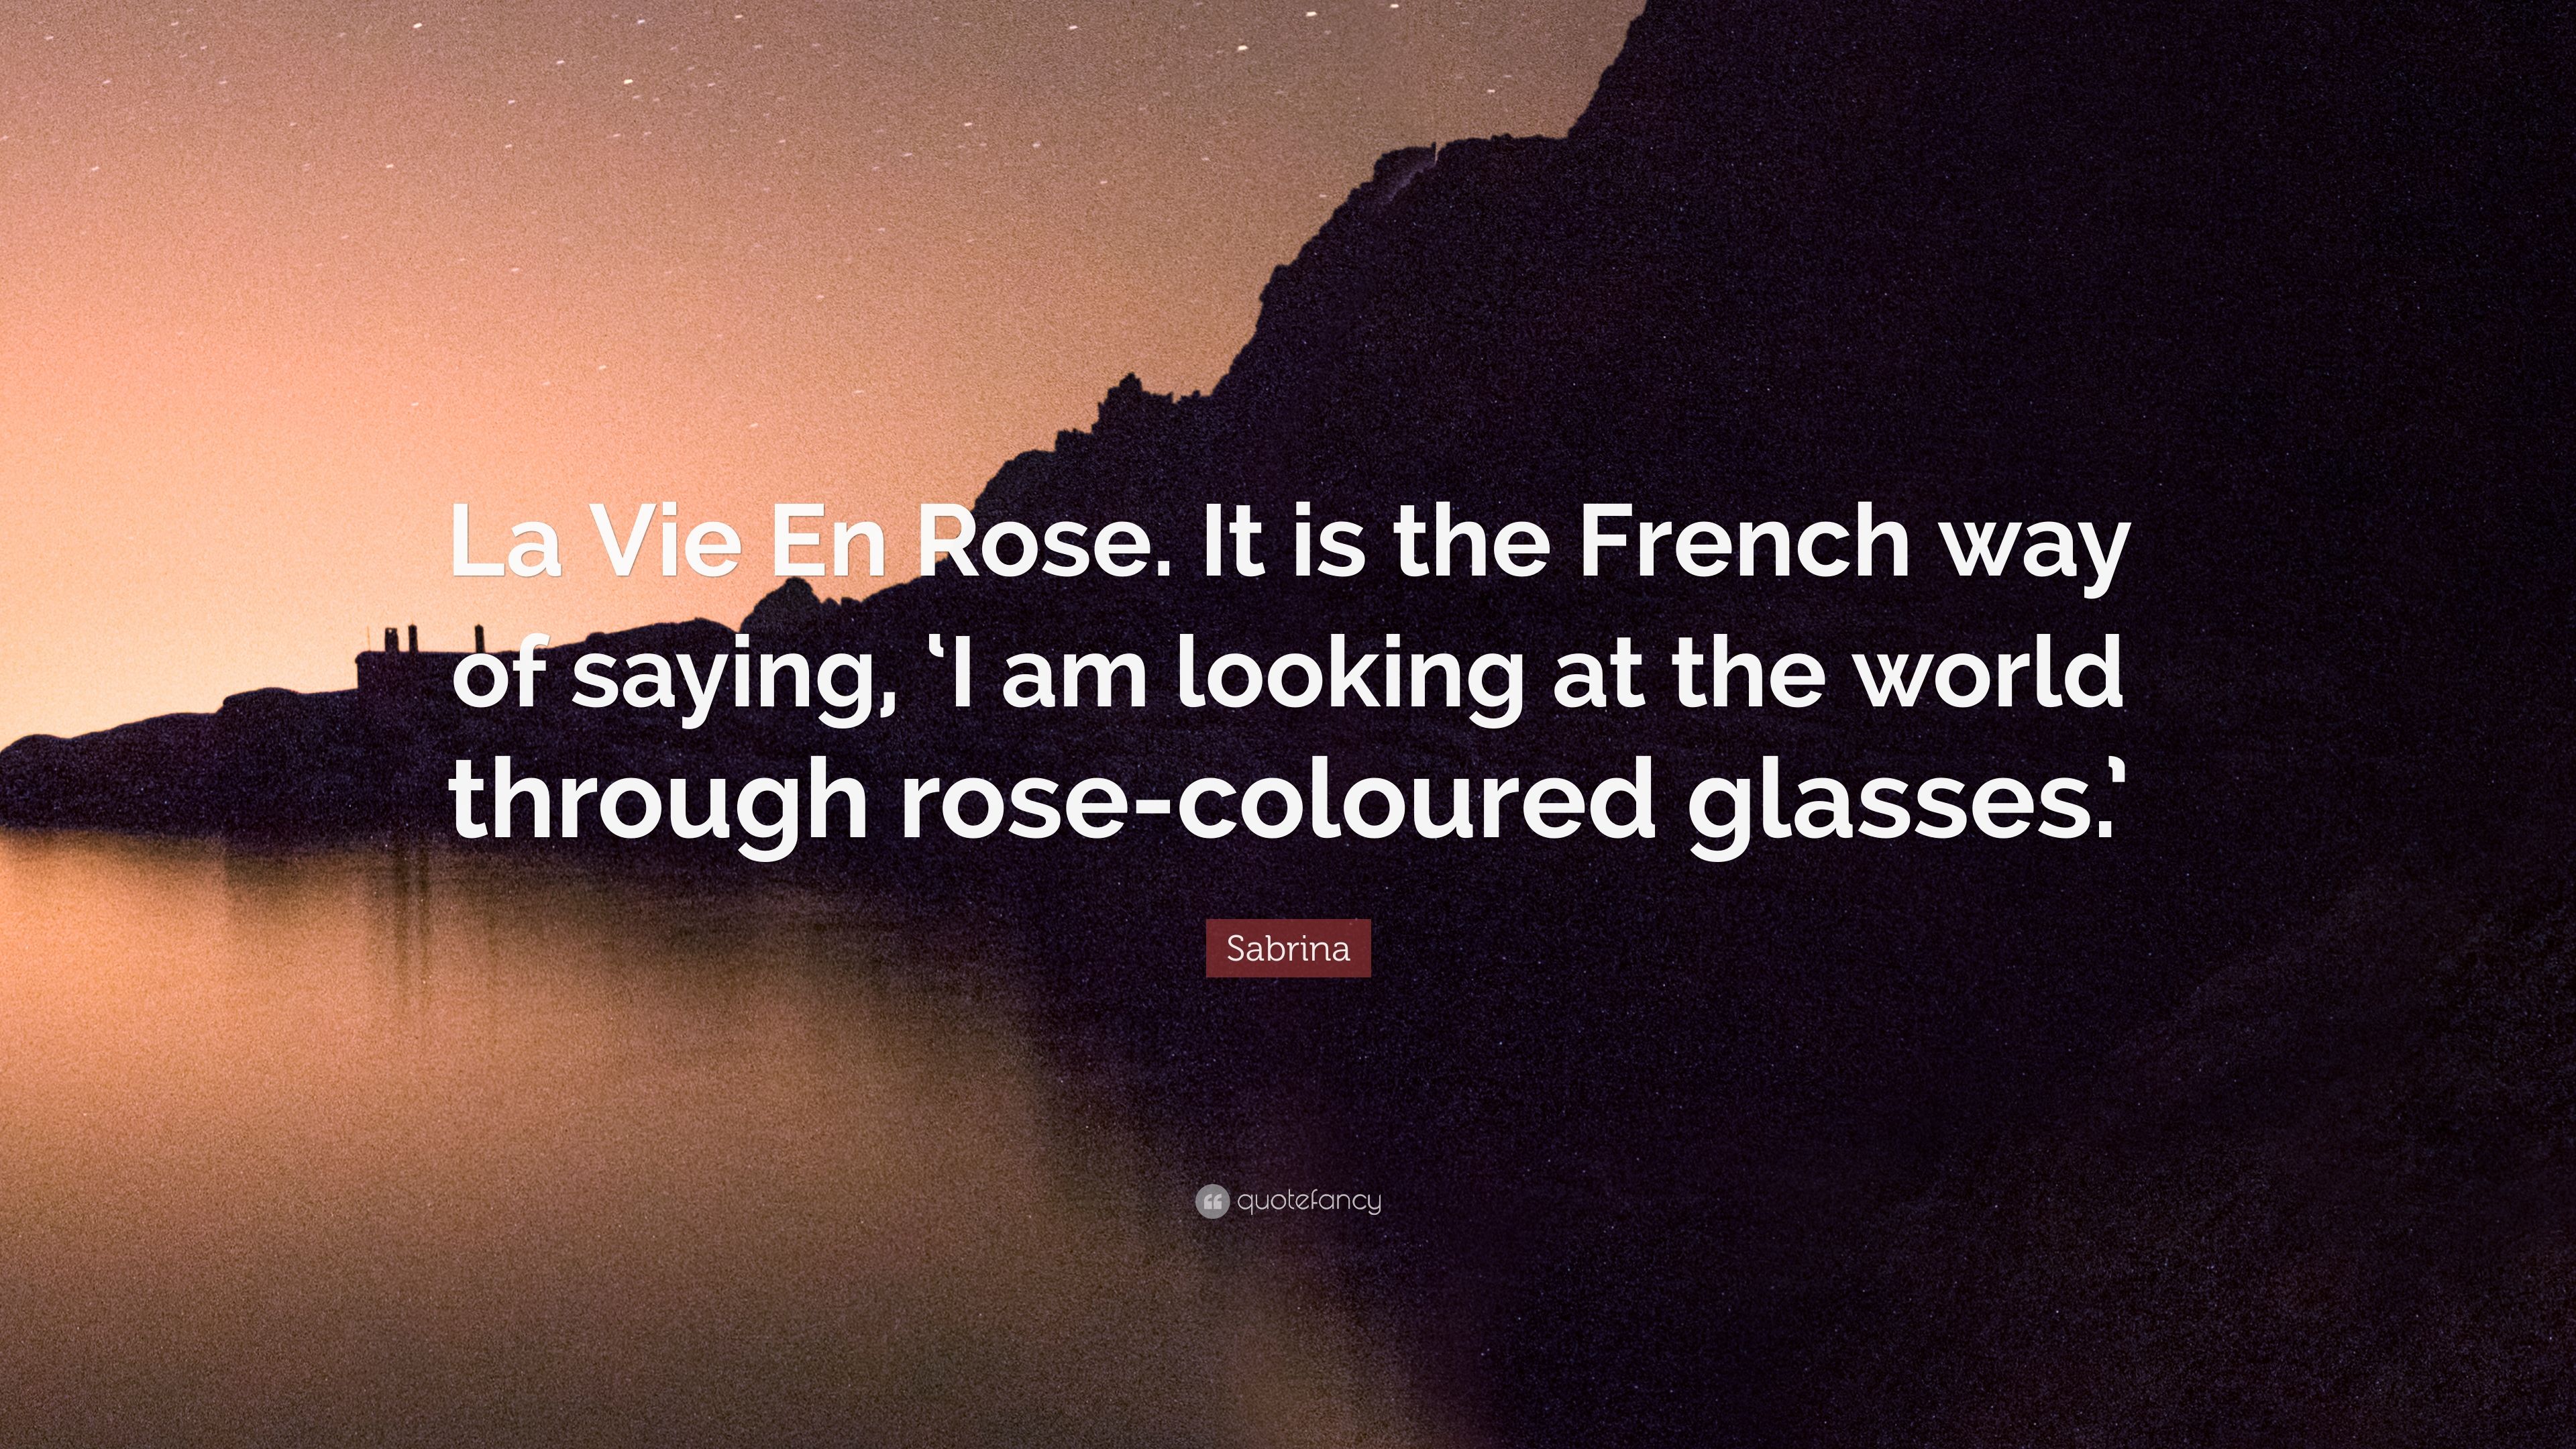 Sabrina Quote: “La Vie En Rose. It is the French way of saying, 'I